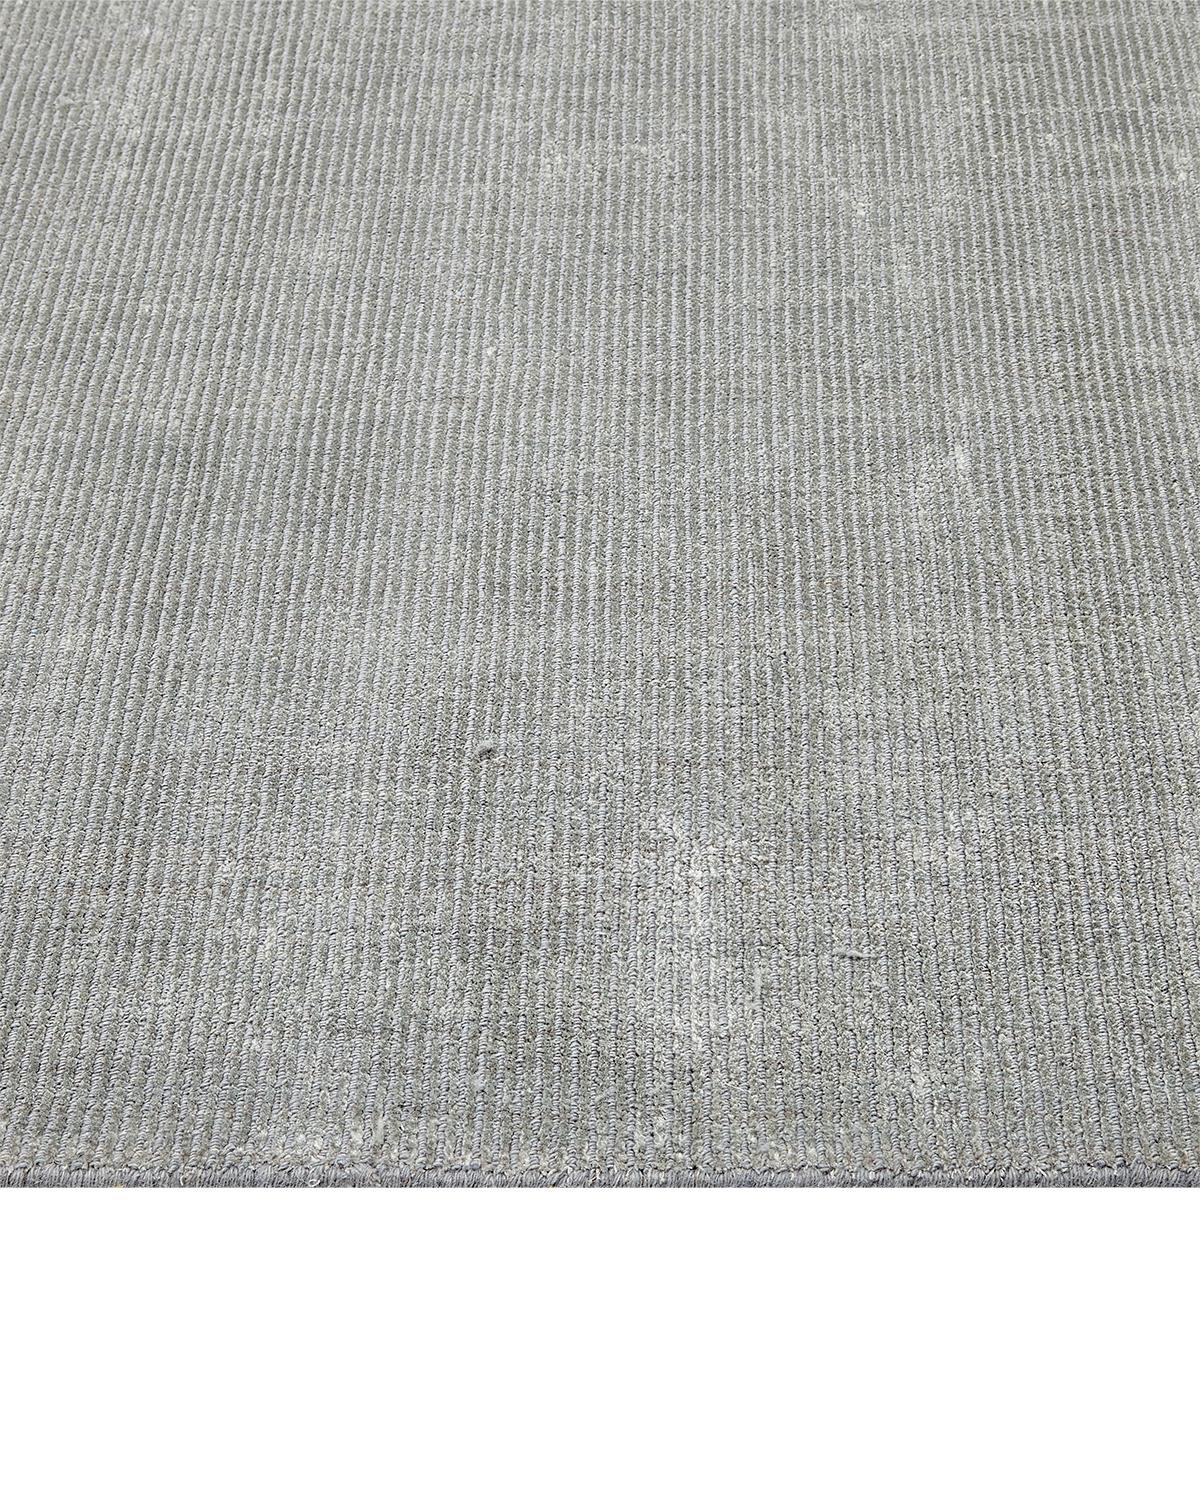 Modern Solo Rugs Cordi Contemporary Solid Handmade Area Rug Gray For Sale